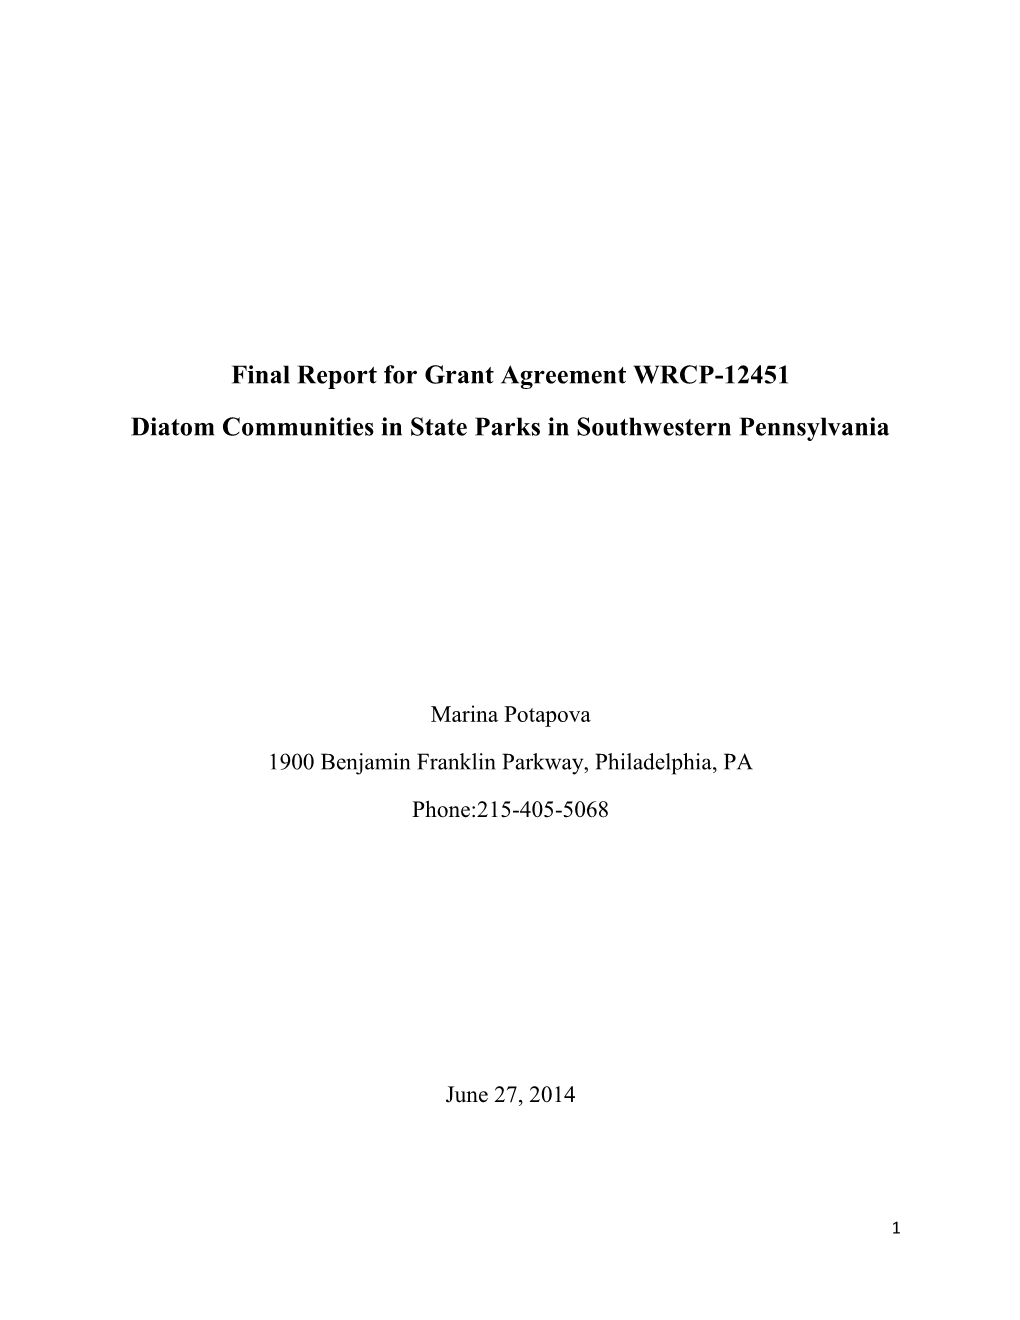 Final Report for Grant Agreement WRCP-12451 Diatom Communities in State Parks in Southwestern Pennsylvania